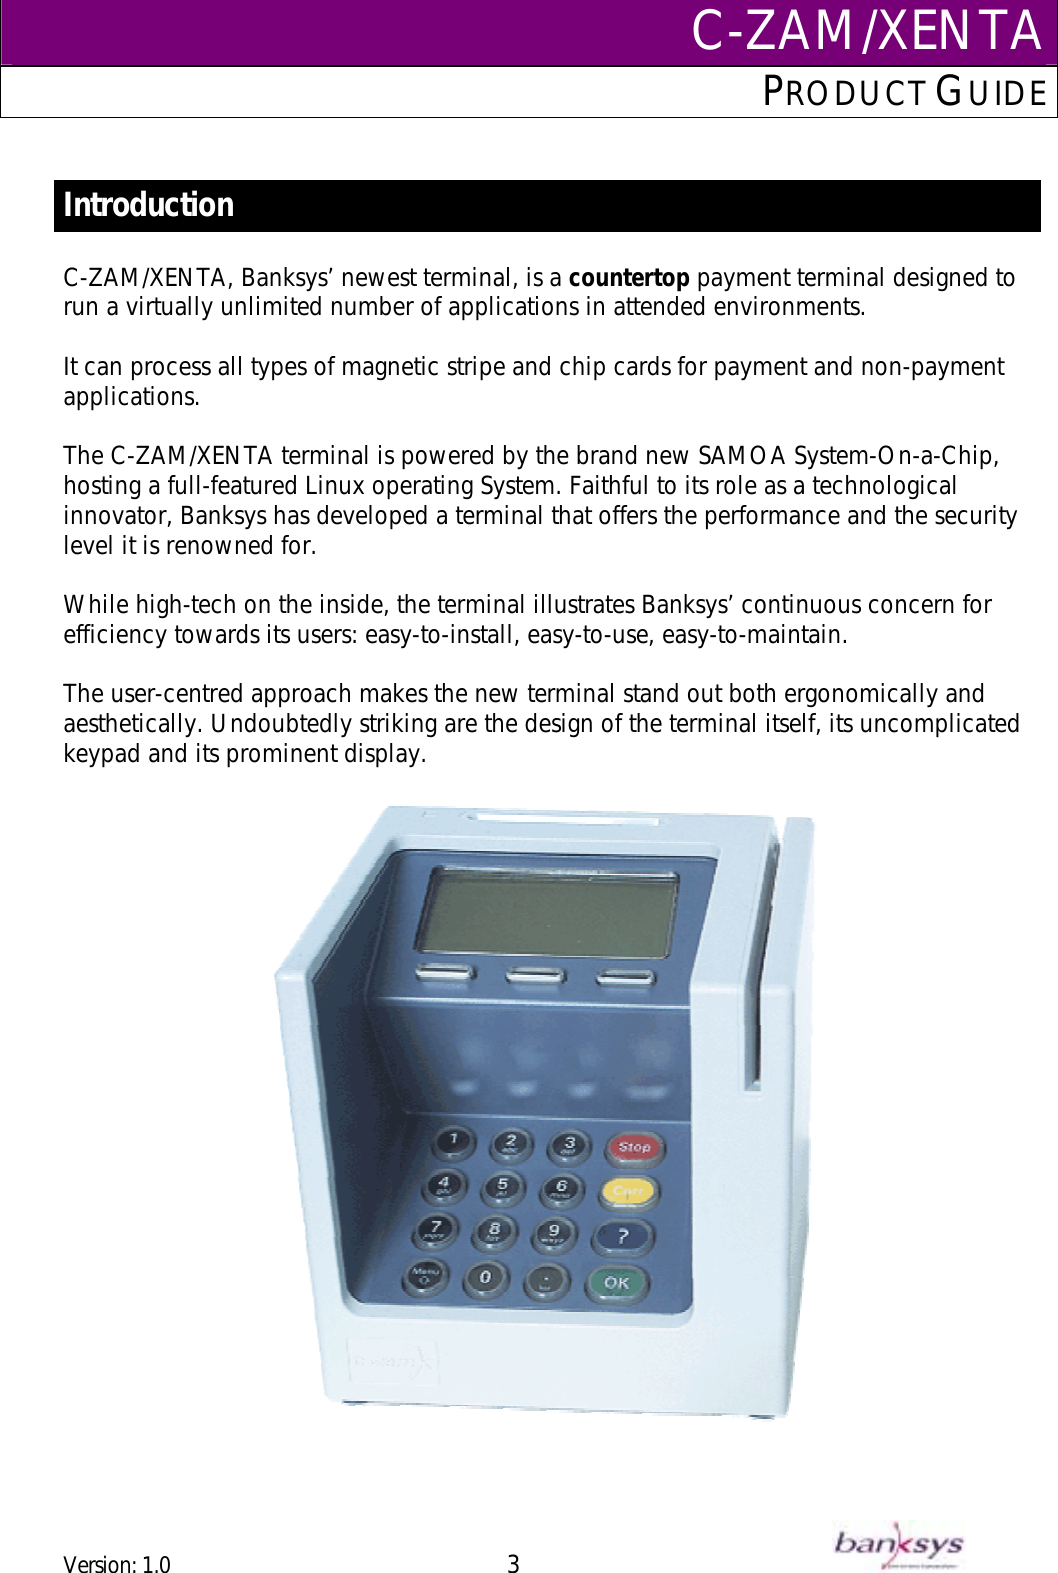 C-ZAM/XENTAPRODUCT GUIDE   Introduction  C-ZAM/XENTA, Banksys’ newest terminal, is a countertop payment terminal designed to run a virtually unlimited number of applications in attended environments.  It can process all types of magnetic stripe and chip cards for payment and non-payment applications.  The C-ZAM/XENTA terminal is powered by the brand new SAMOA System-On-a-Chip,  hosting a full-featured Linux operating System. Faithful to its role as a technological innovator, Banksys has developed a terminal that offers the performance and the security level it is renowned for.  While high-tech on the inside, the terminal illustrates Banksys’ continuous concern for efficiency towards its users: easy-to-install, easy-to-use, easy-to-maintain.   The user-centred approach makes the new terminal stand out both ergonomically and aesthetically. Undoubtedly striking are the design of the terminal itself, its uncomplicated keypad and its prominent display.      Version: 1.0 3      